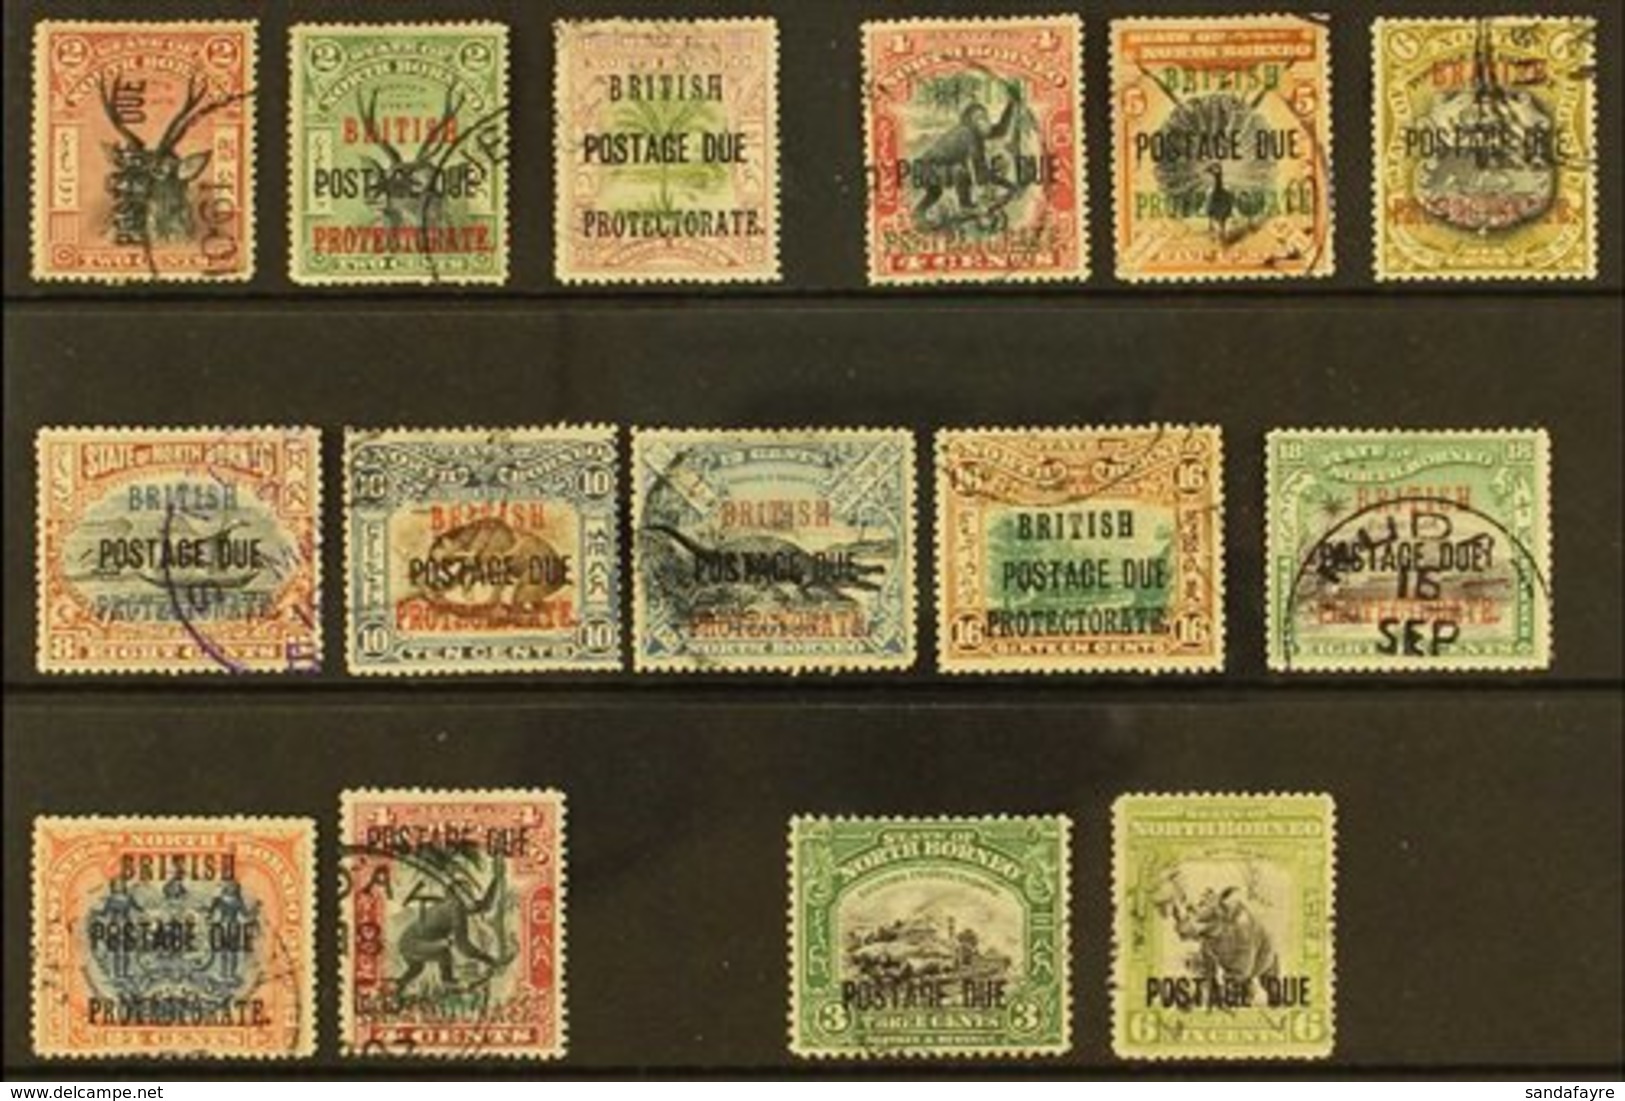 POSTAGE DUES  1897 - 1930 Fine Postally Used Selection With Cds Cancels Including 1902 Vals To 24c, 1906 4c Black And Ca - North Borneo (...-1963)